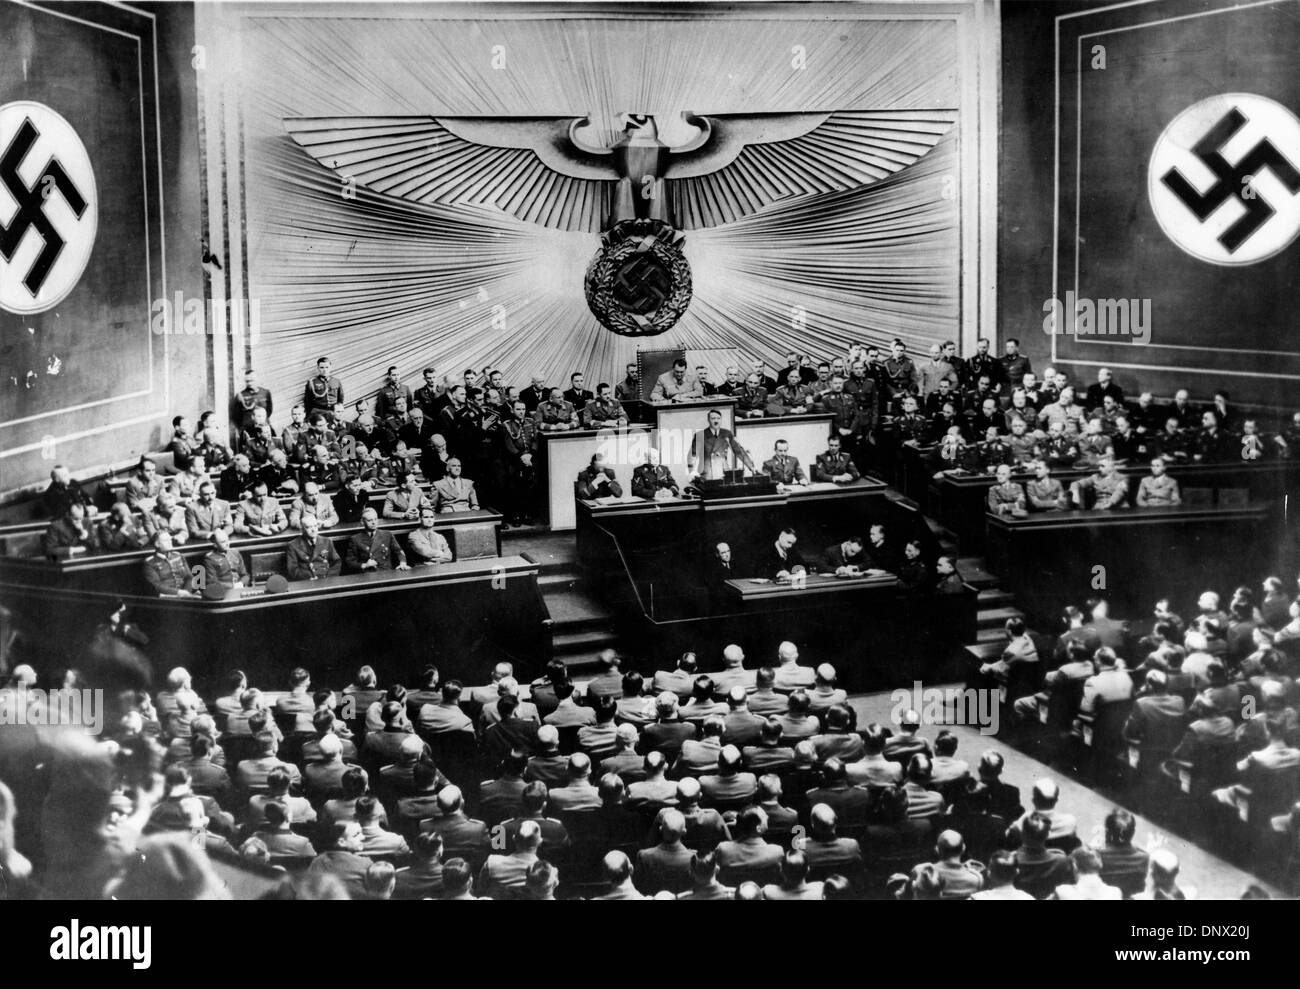 March 19, 1938 - Berlin, Germany - ADOLF HITLER during a meeting at the Reichstag. Adolf Hitler (April 20, 1889ÐApril 30, 1945) was the Fuhrer und Reichskanzler (Leader and Imperial chancellor) of Germany from 1933 to his death. He was leader of the National Socialist German Workers Party (NSDAP), better known as the Nazi Party. At the height of his power, the armies of Nazi German Stock Photo